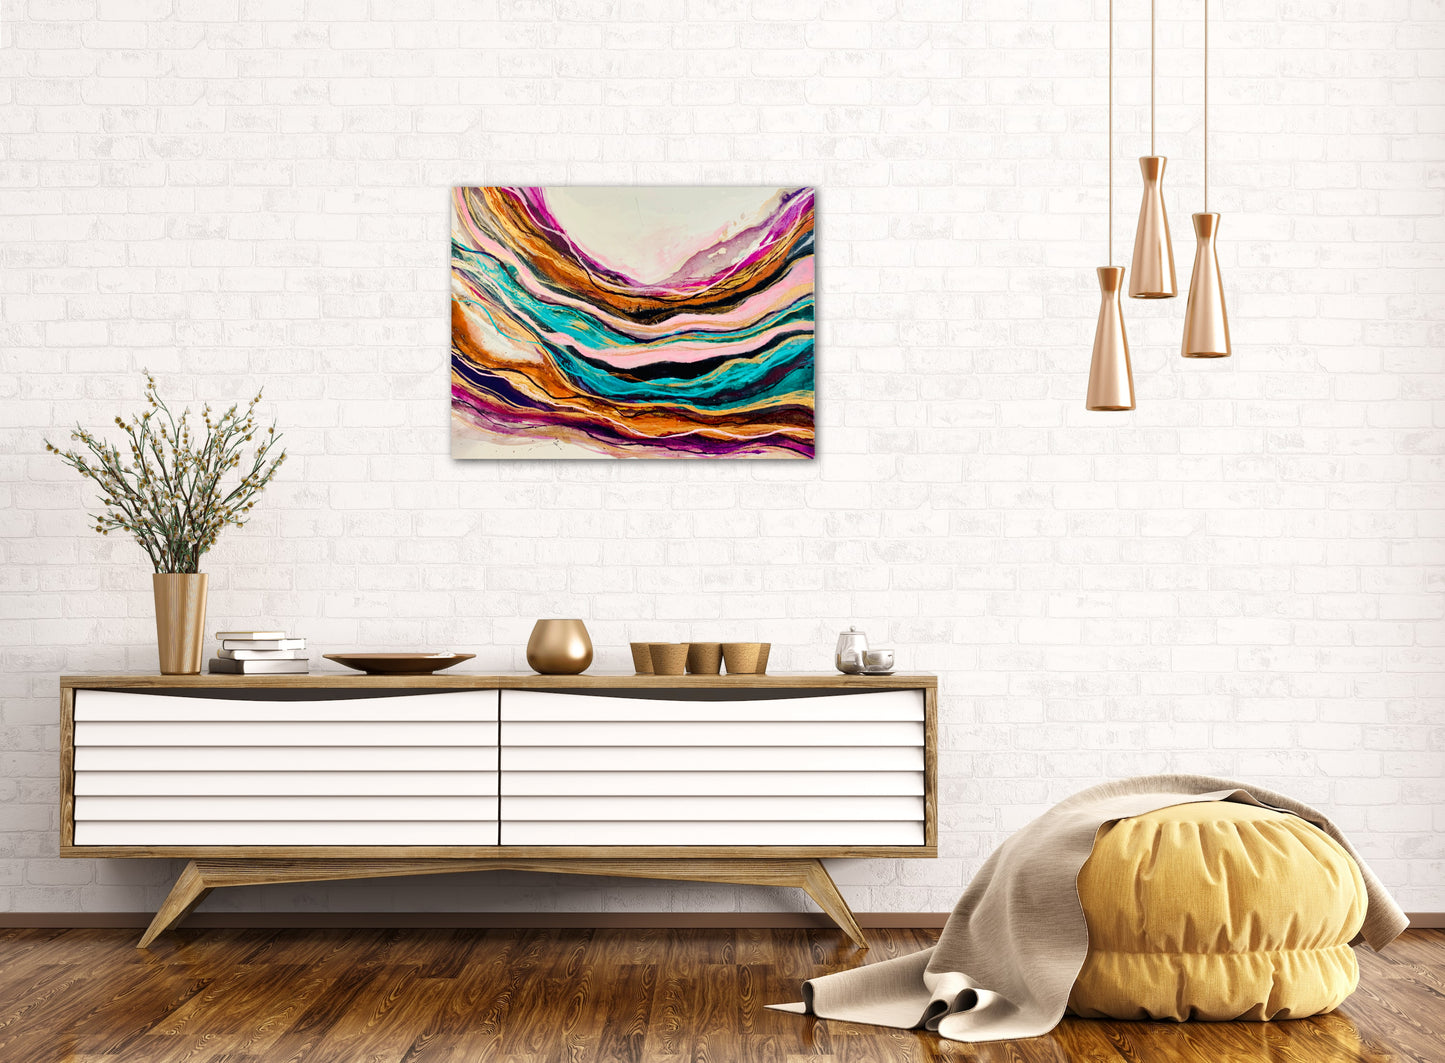 Intertwined Original Art Collection